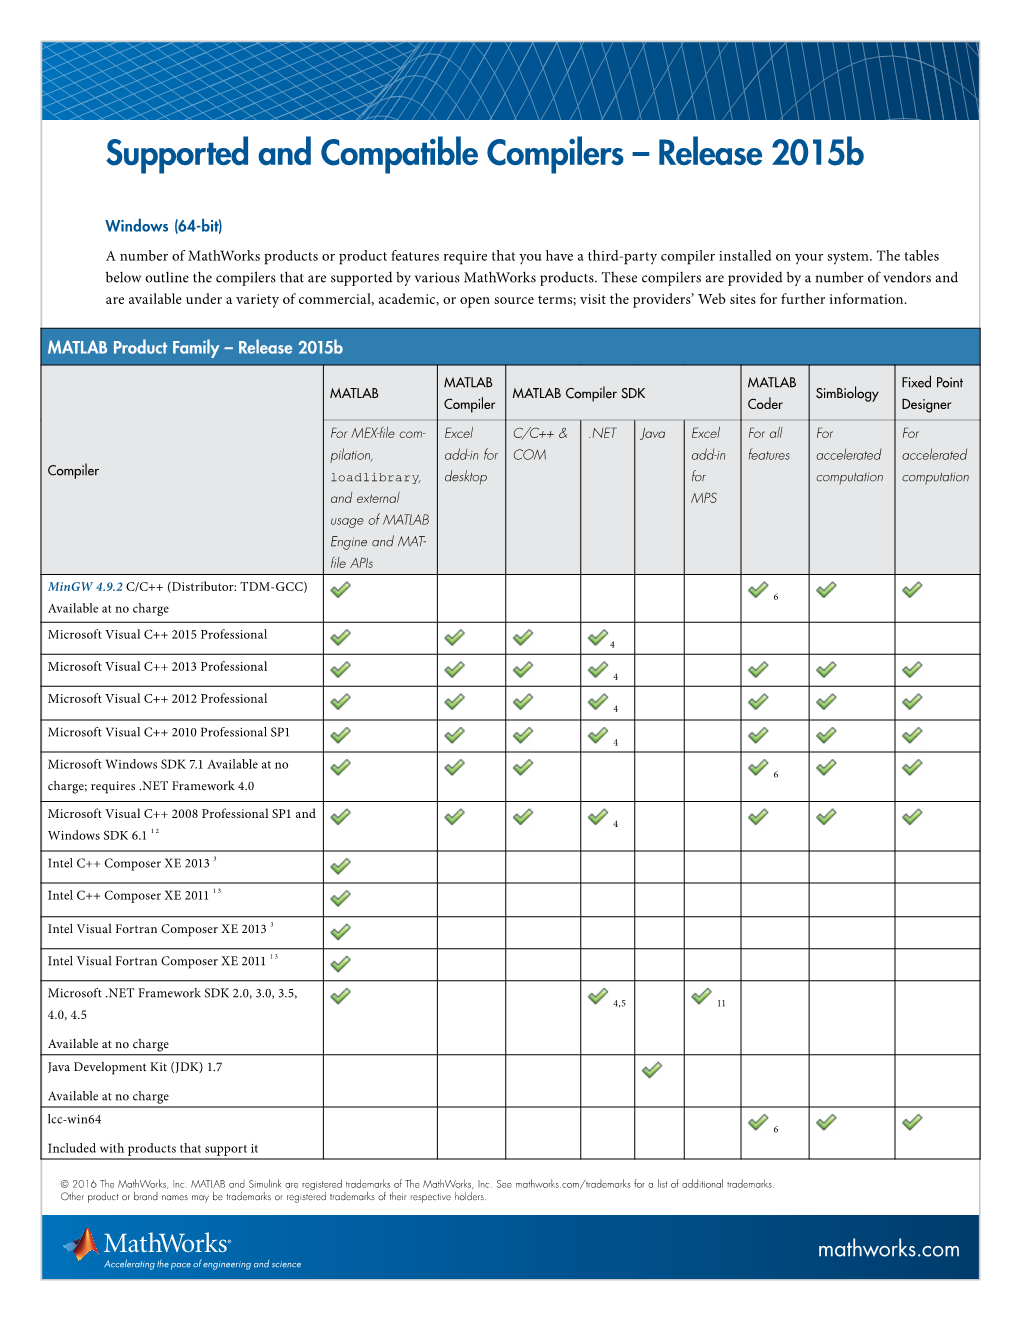 Supported and Compatible Compilers – Release 2015B